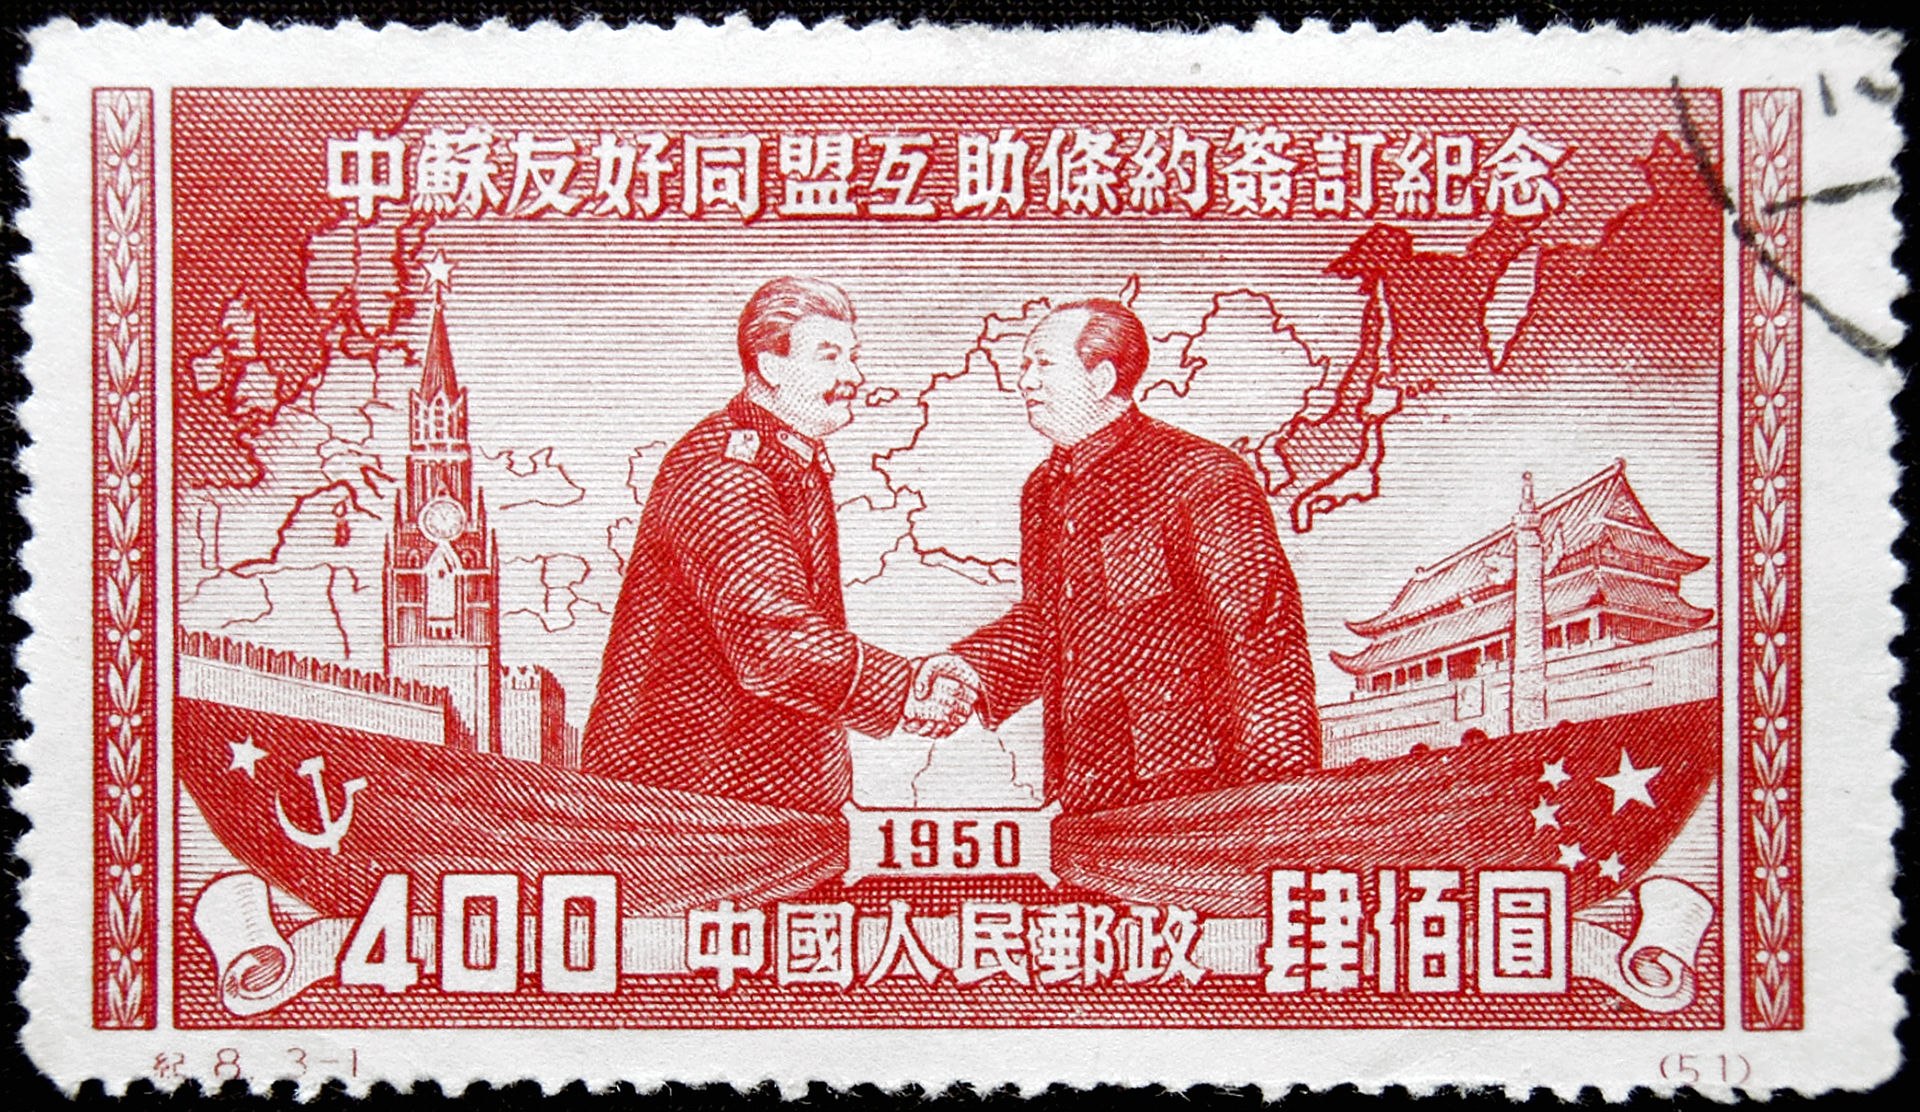 A Chinese stamp commemorating the signing of the Treaty of Friendship, Alliance, and Mutual Assistance.